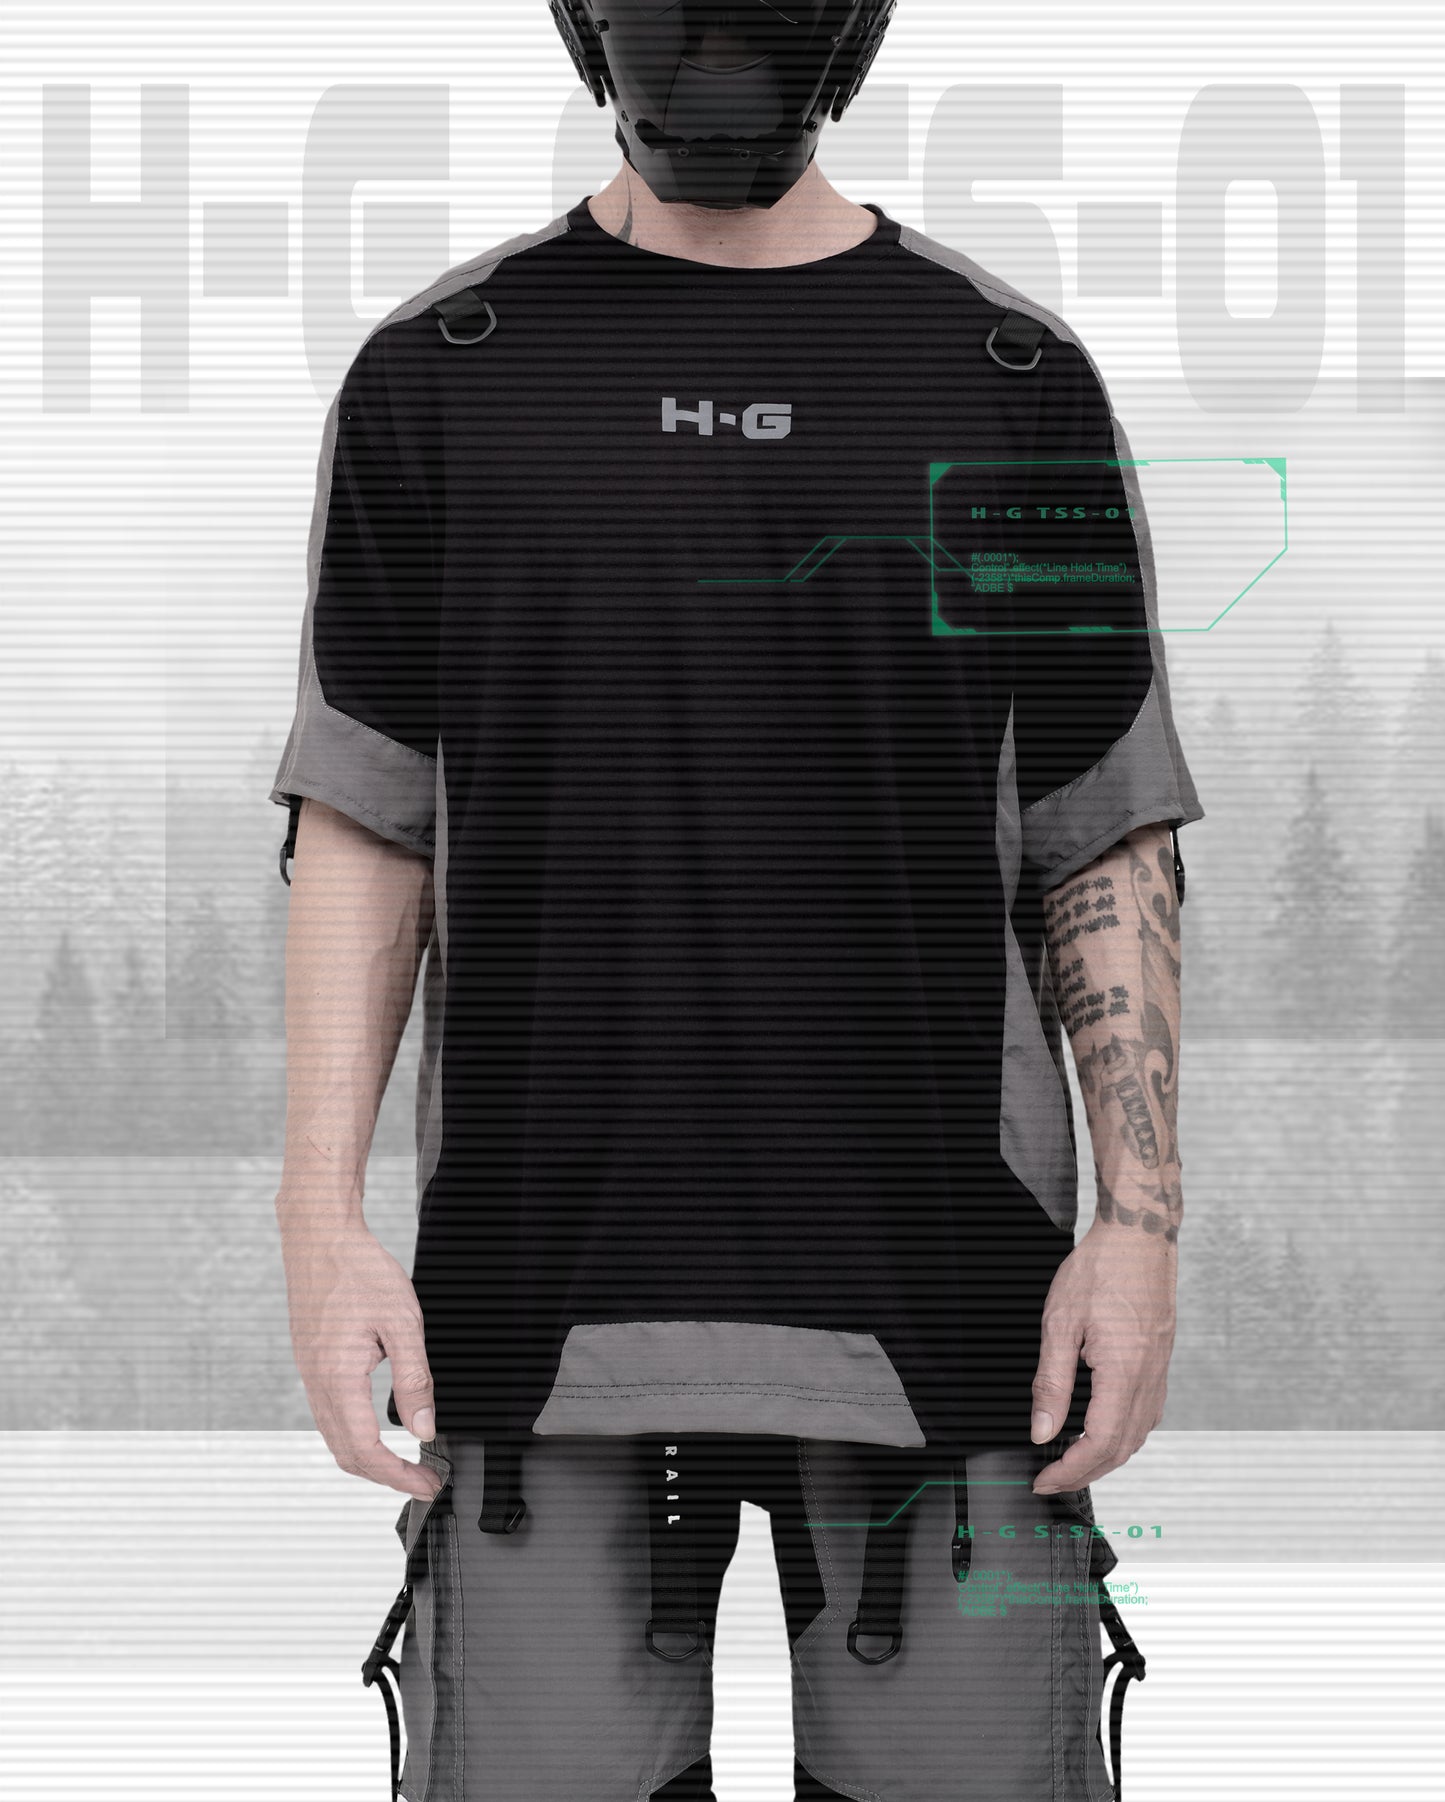 H-G T.SS-01/GRY